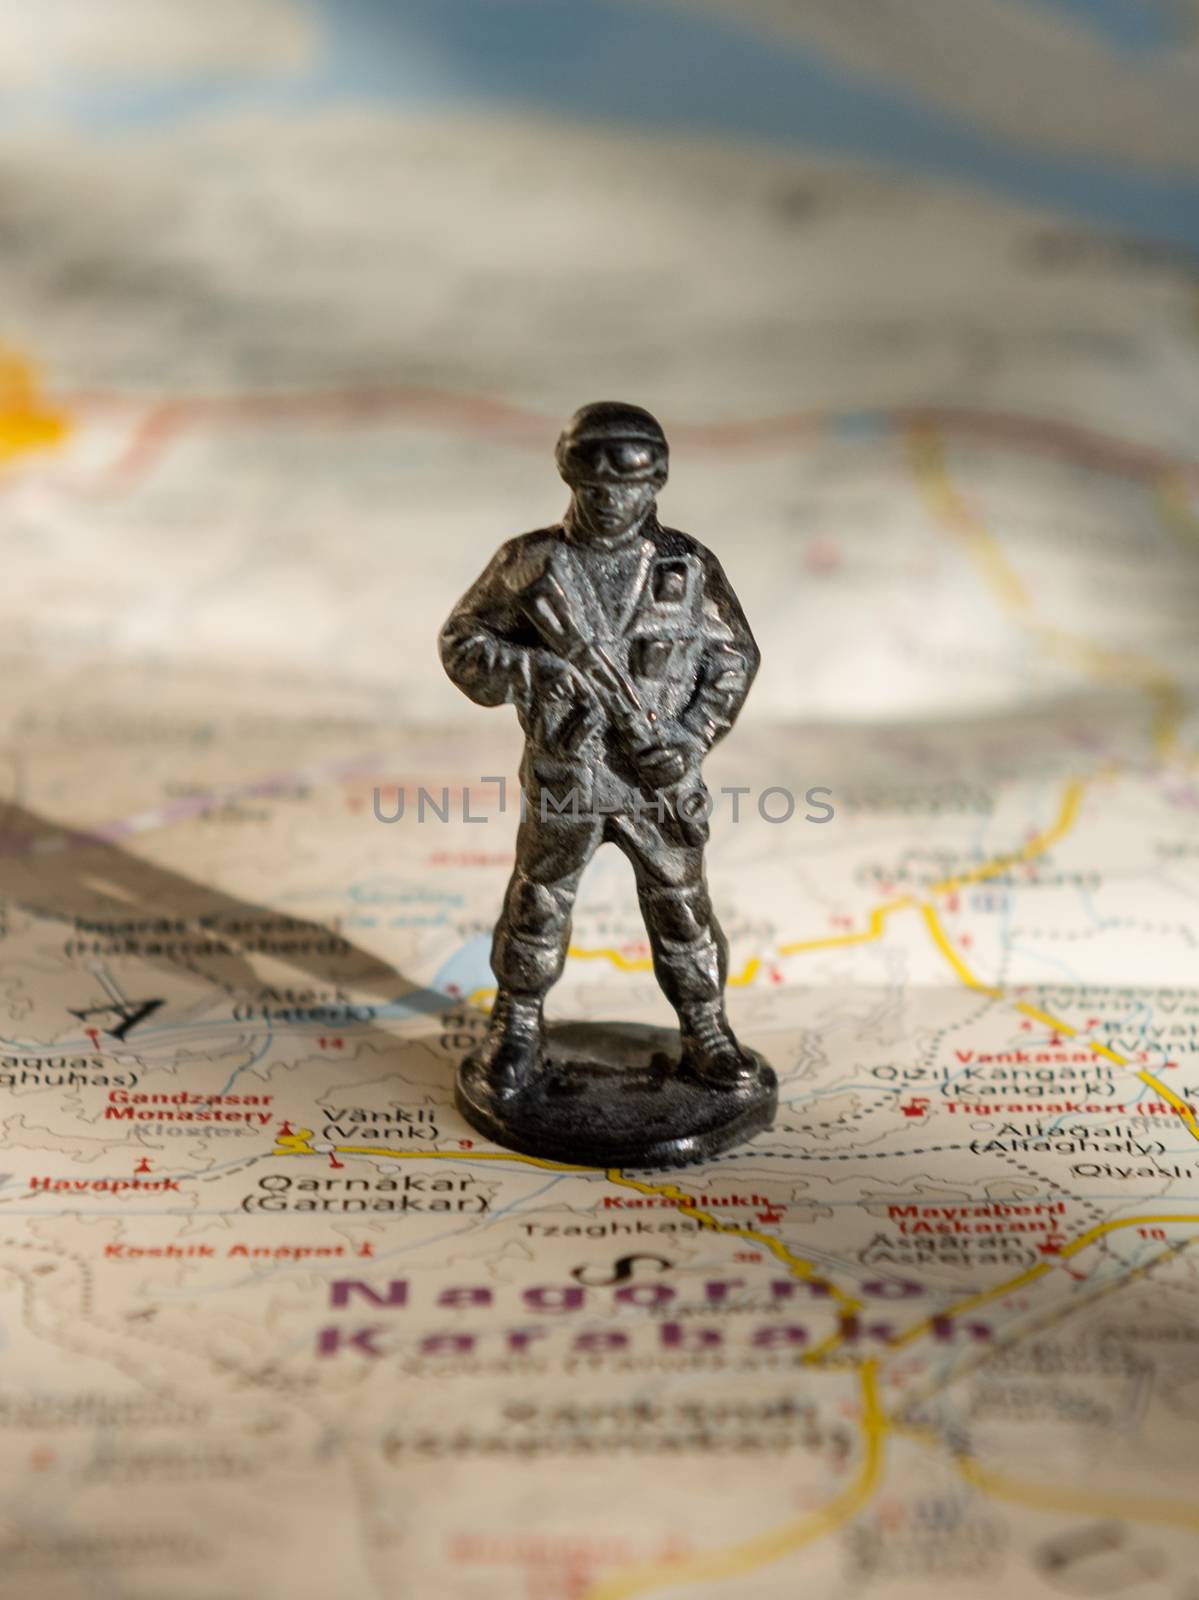 A figurine of an armed soldier on the map of Nagorno-Karabakh.